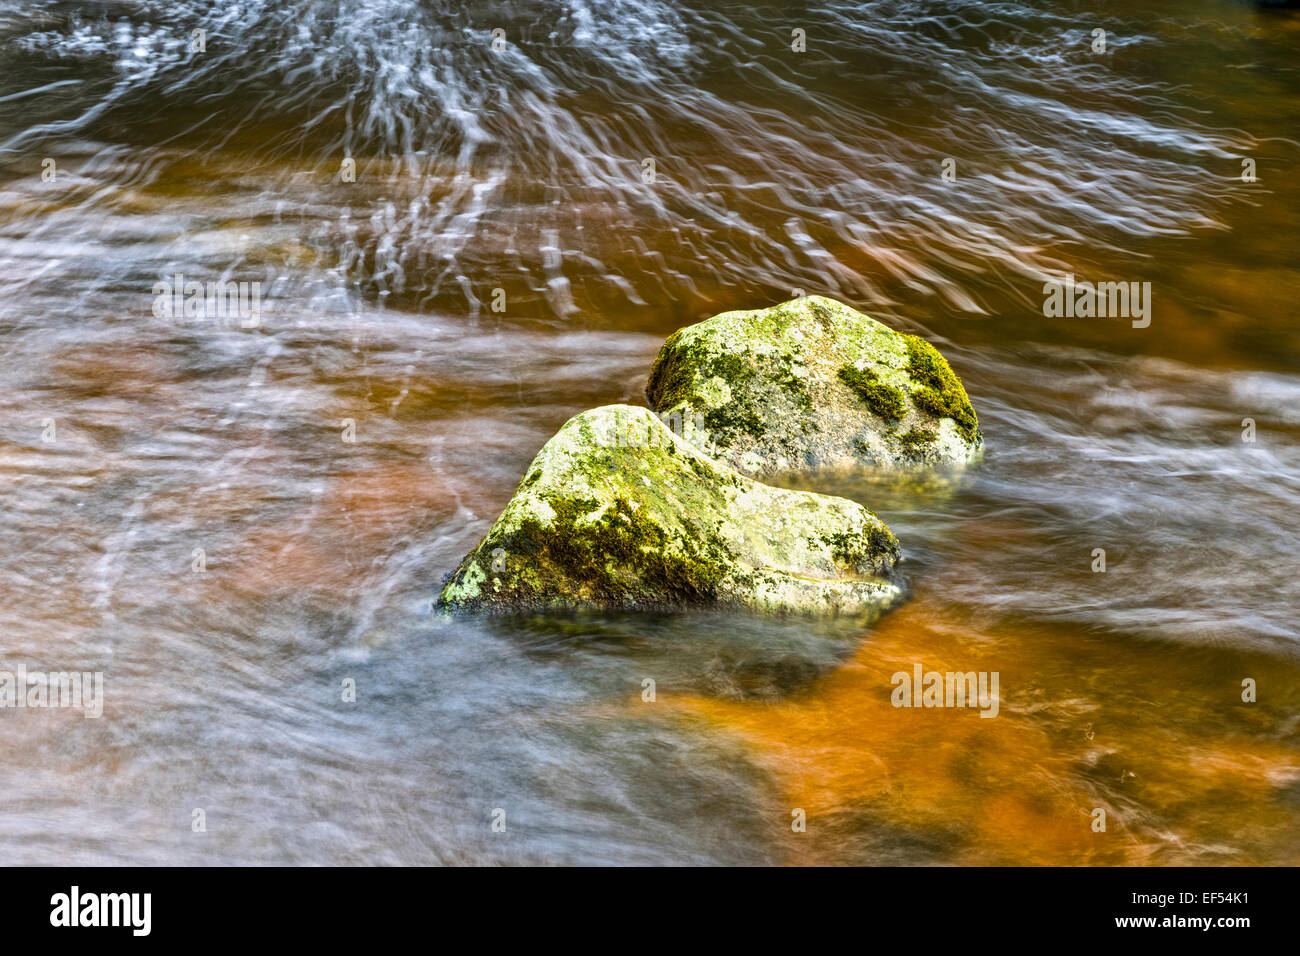 Moss-Covered Rocks in River